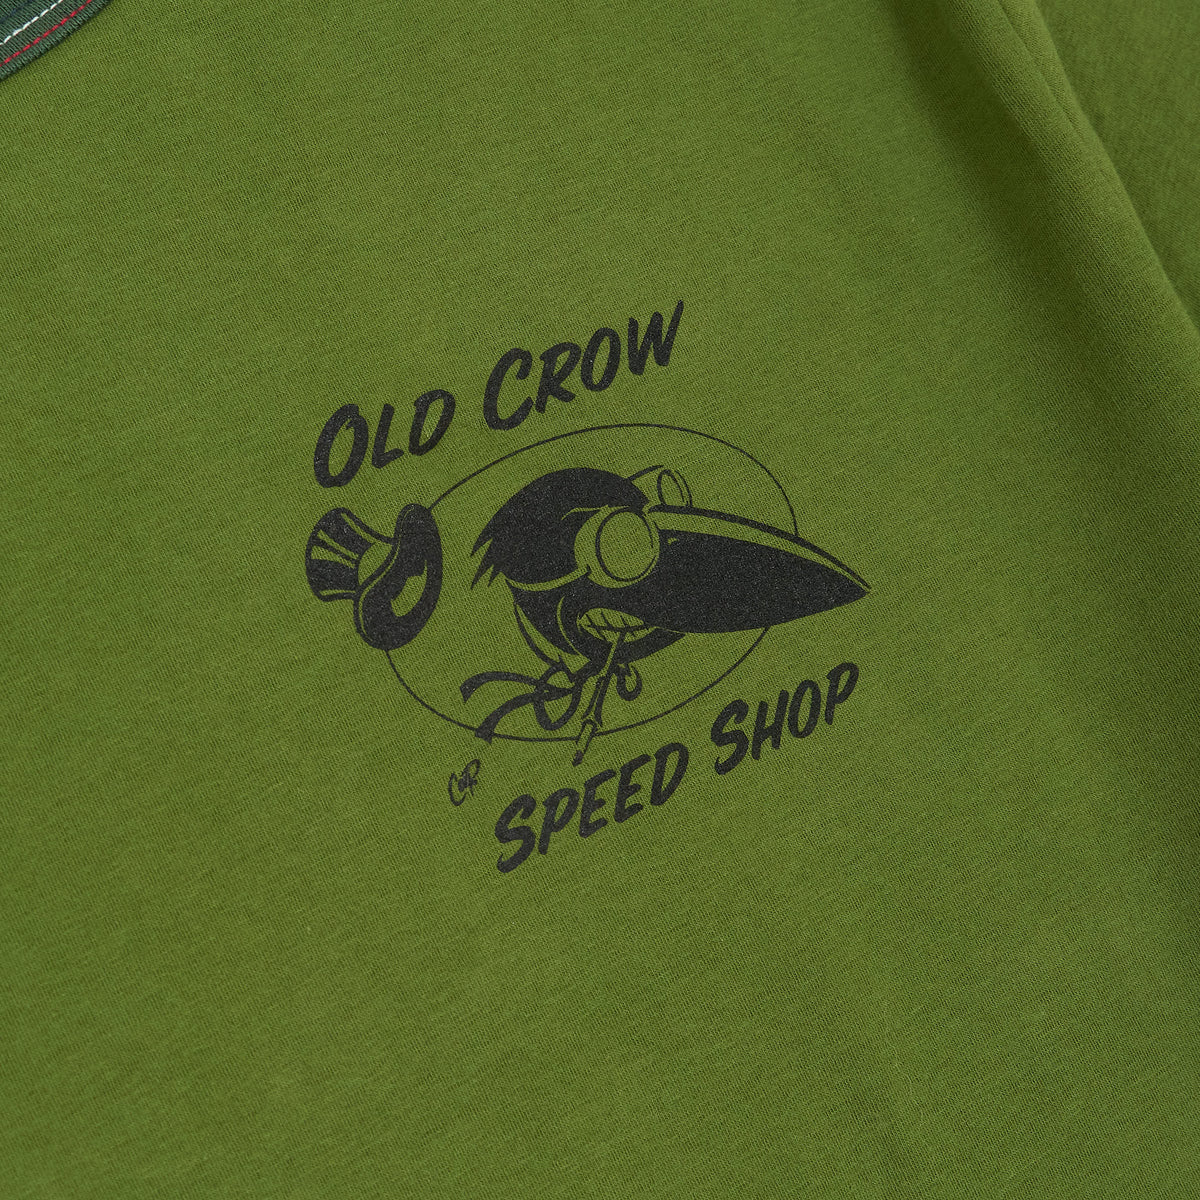 Old Crow Speed Shop Red Wite Blue  Crew Neck Printed T-Shirt